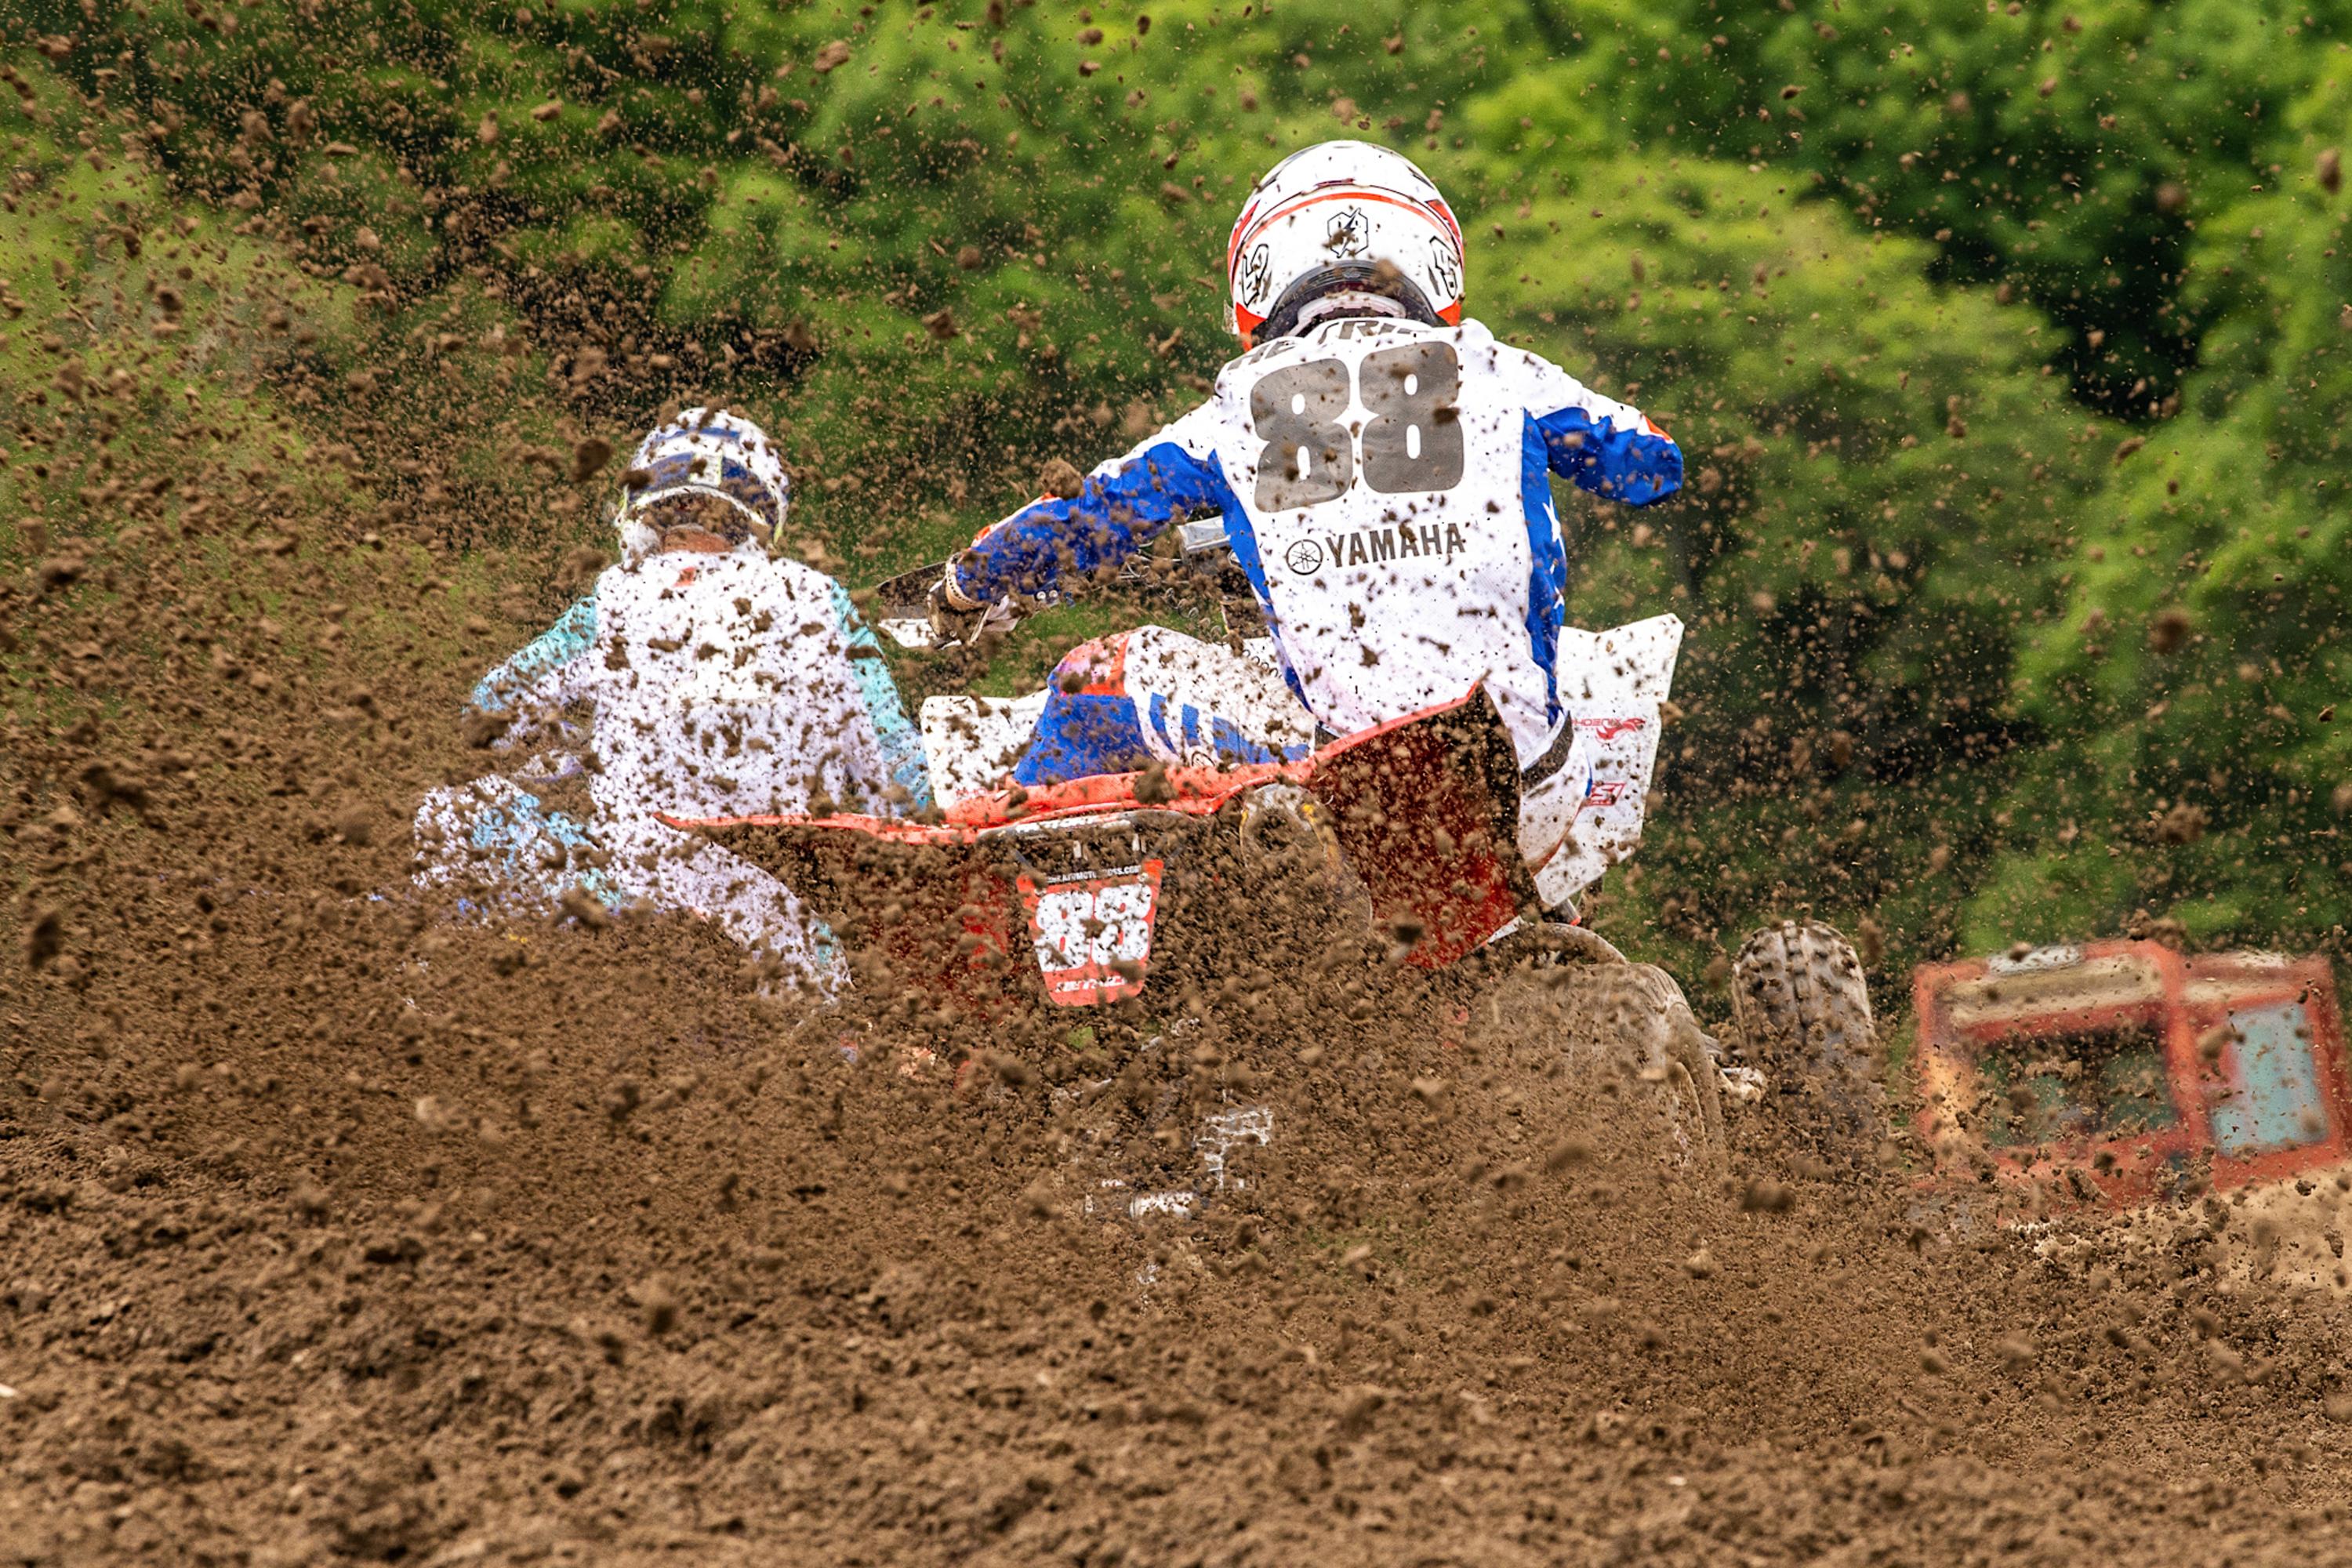 Competition Bulletin 2023-2: Final 2023 ATVMX Series Schedule, Supplemental Rules, National Classes and Orders Now Posted